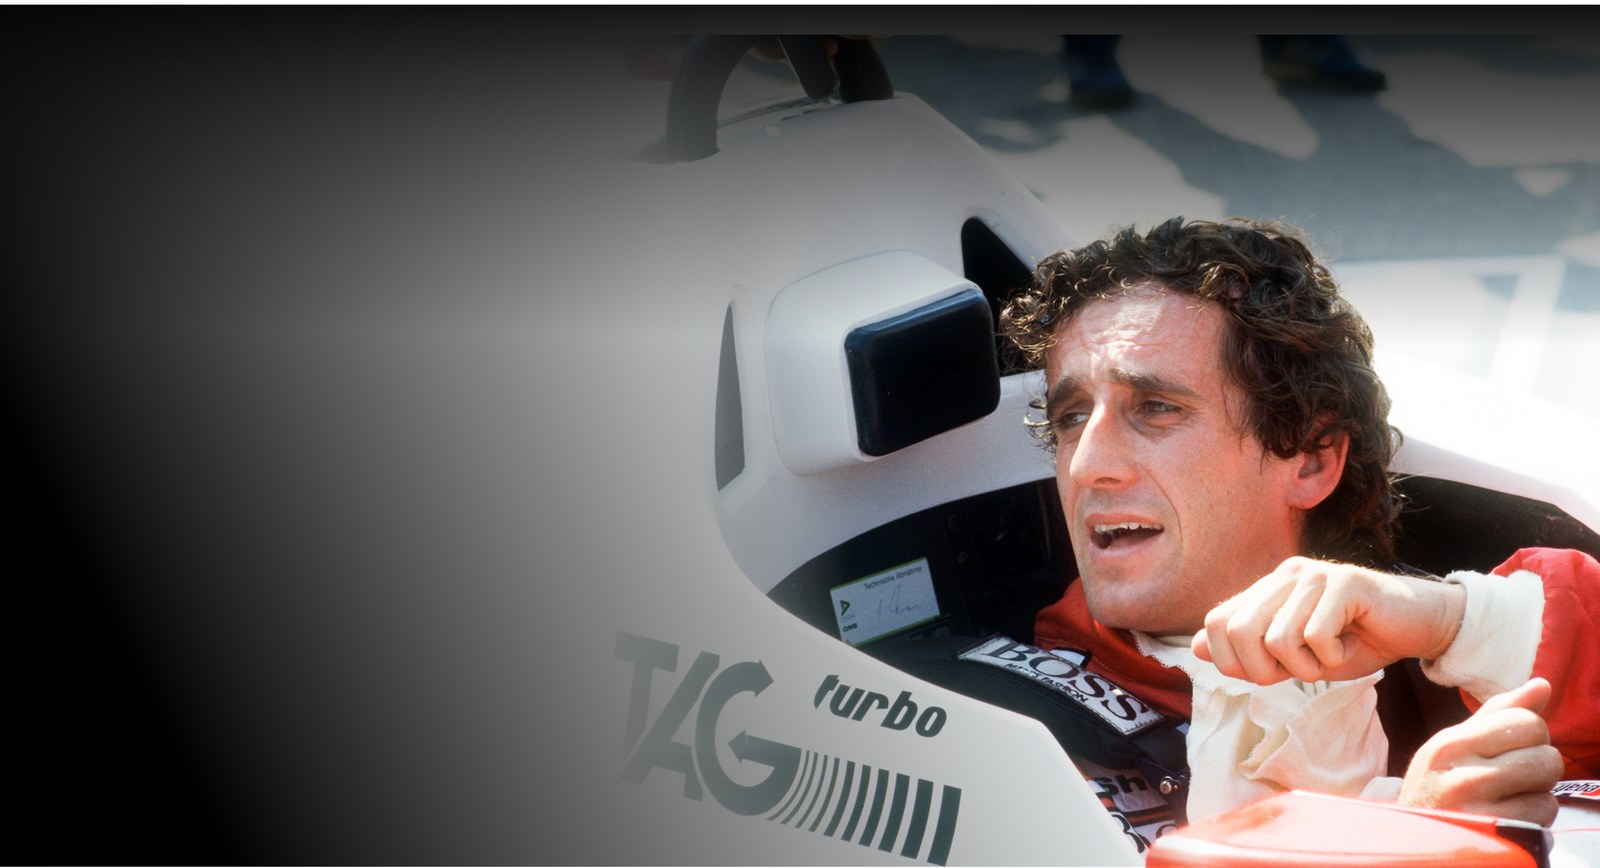 Documentaire Alain Prost - CANAL+